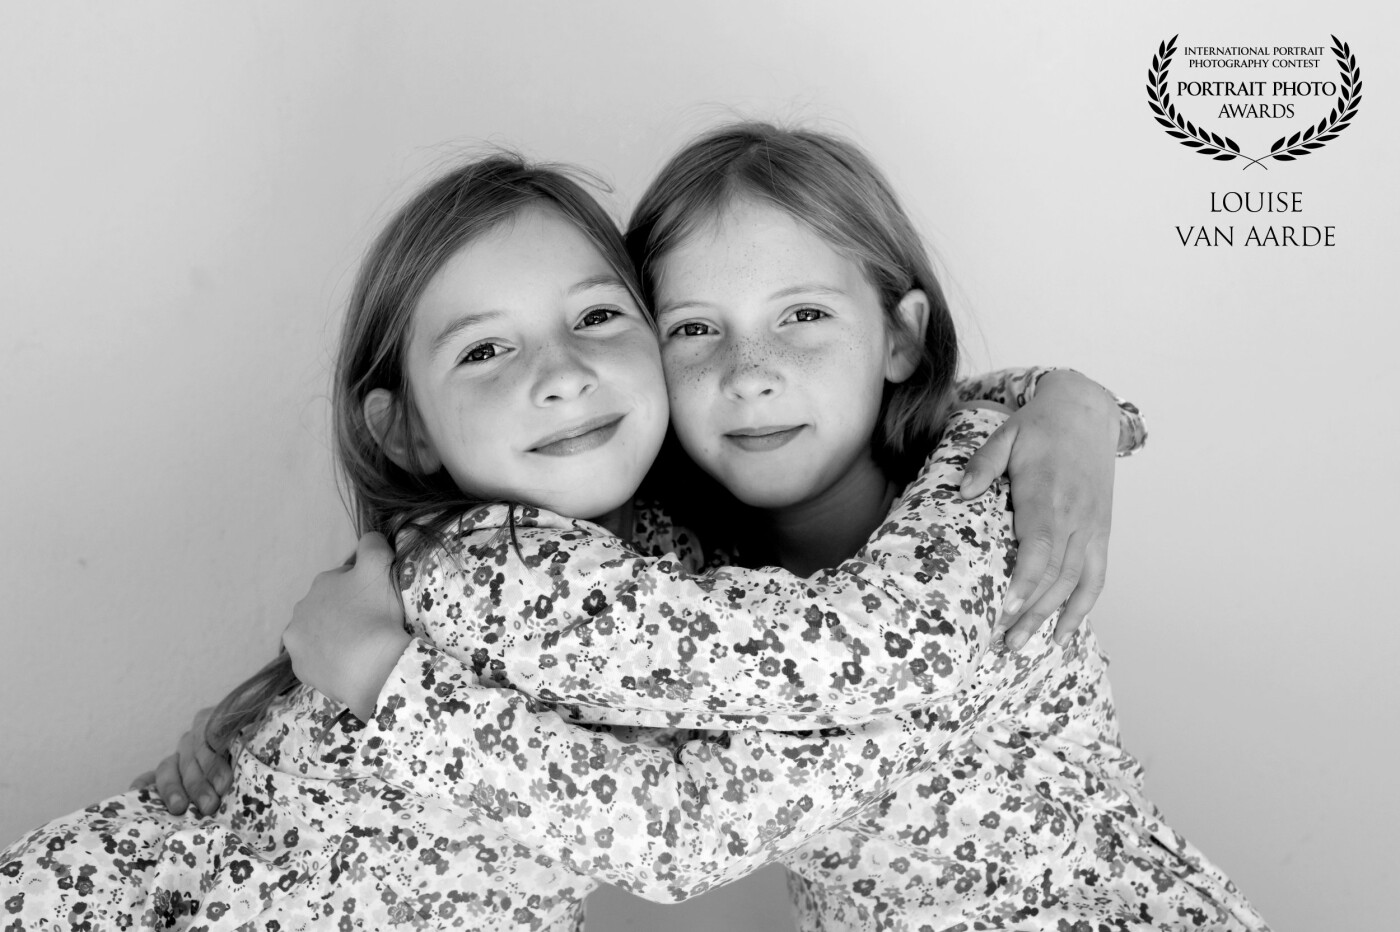 This photo was taken while visiting family on their farm in the Klein Karoo, South Africa. I always love engaging these two sisters as subjects purely for the exuberant amount of joy they have for life, true farm bread, nature’s children. My daughter and myself cannot wait for our next visit.